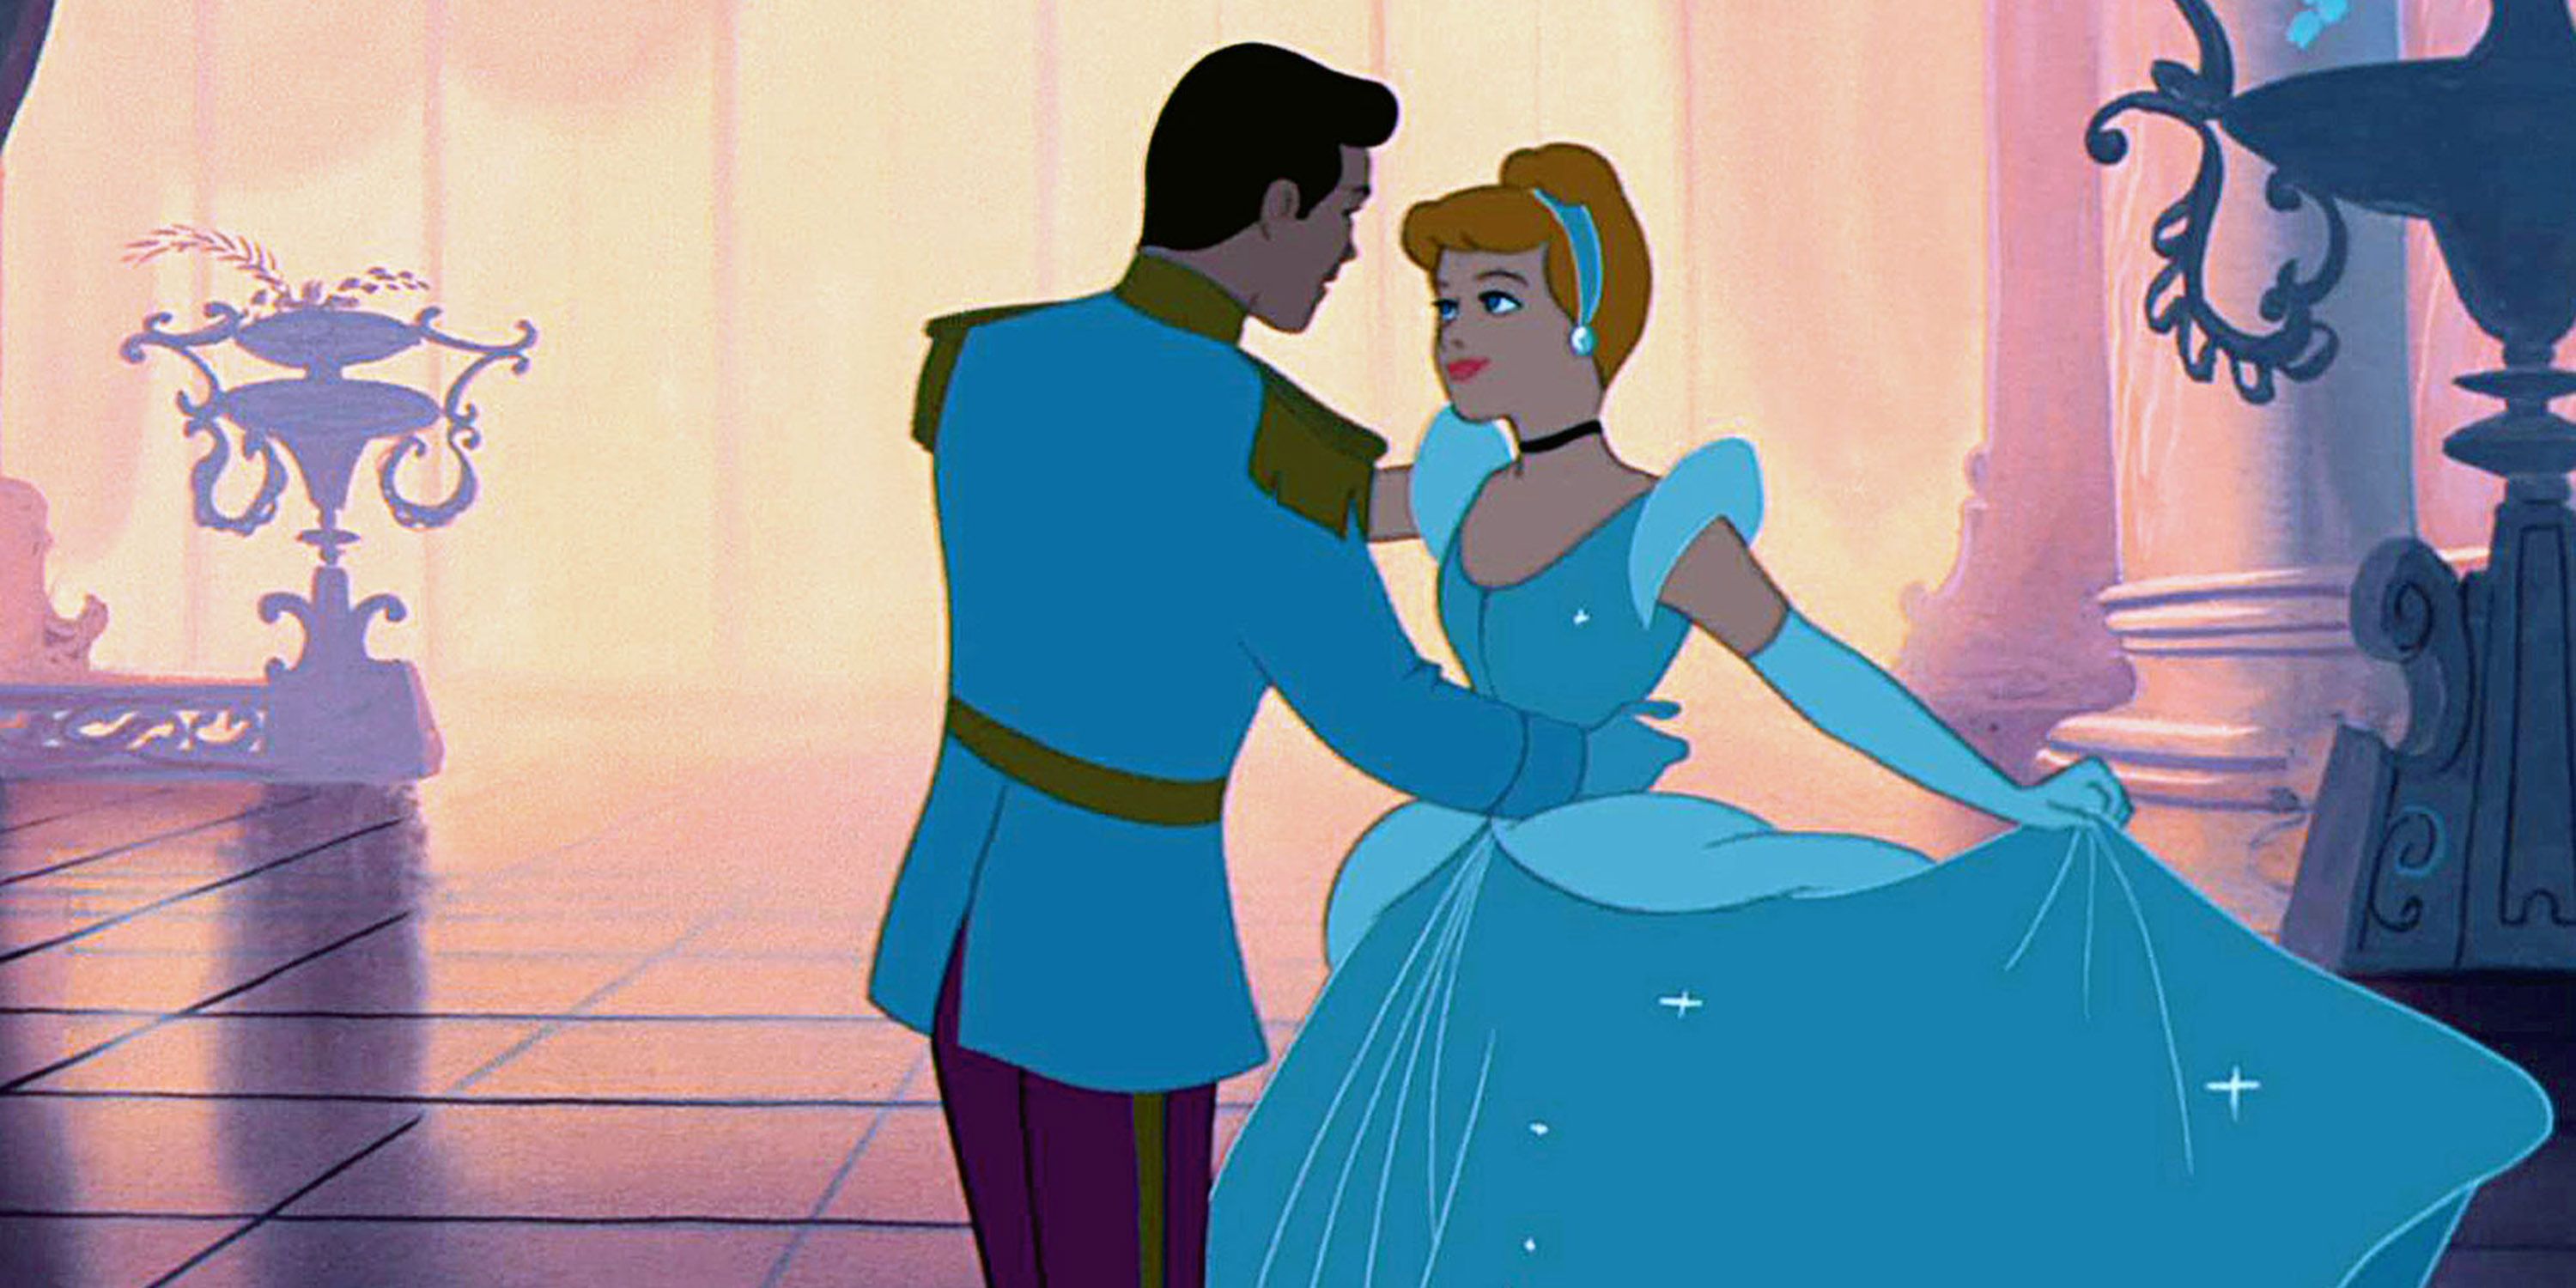 45 Best Disney Movies of All Time - Where to Watch Disney Movies Online